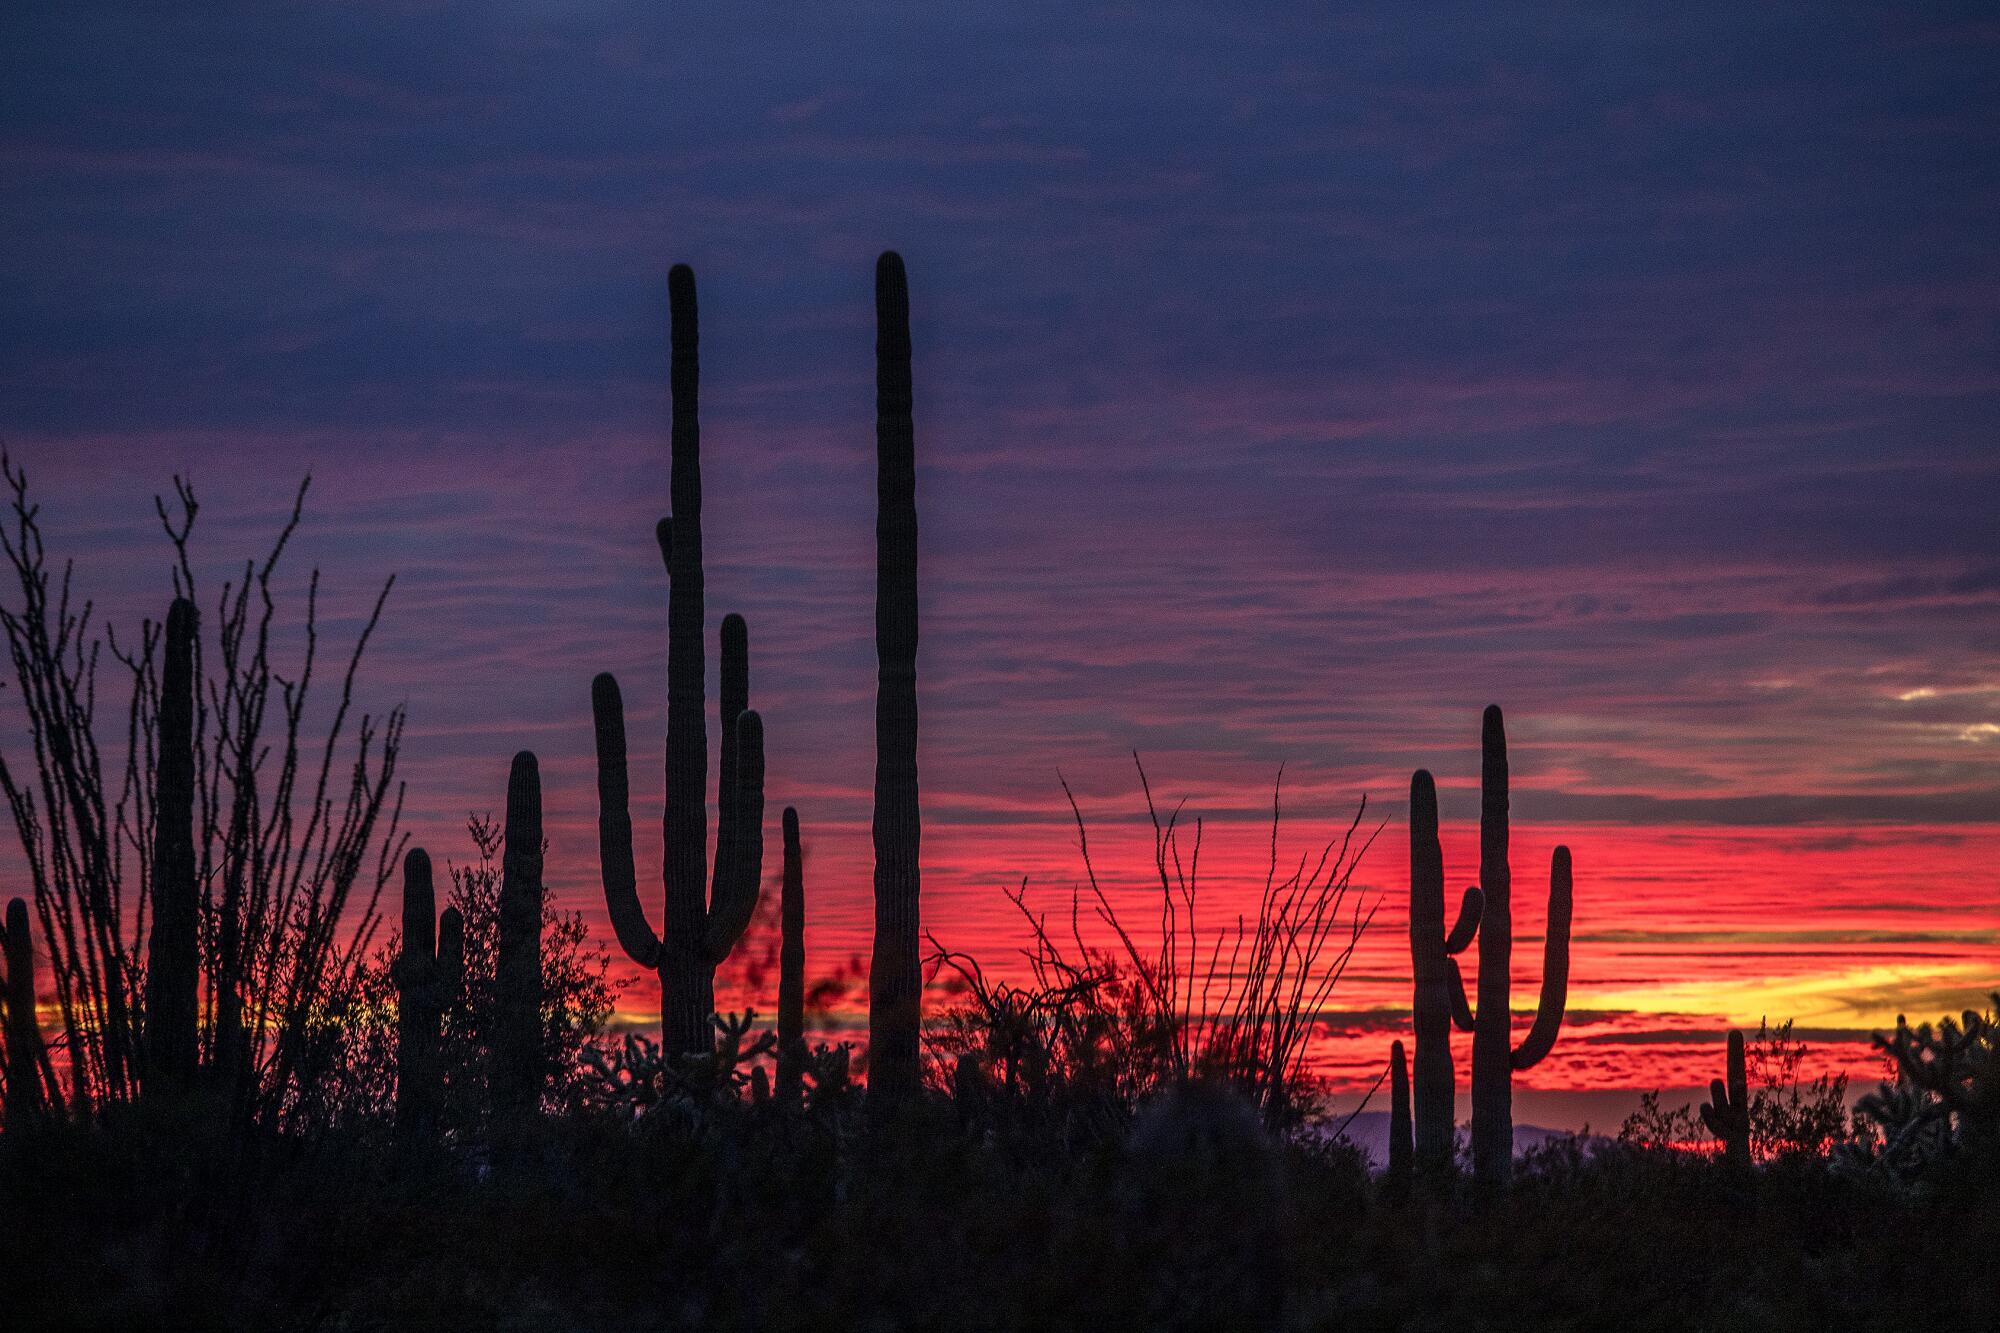 The sun sets behind saguaro cactuses and ocotillos on the La Abra Plain in Organ Pipe Cactus National Monument  in Arizona.